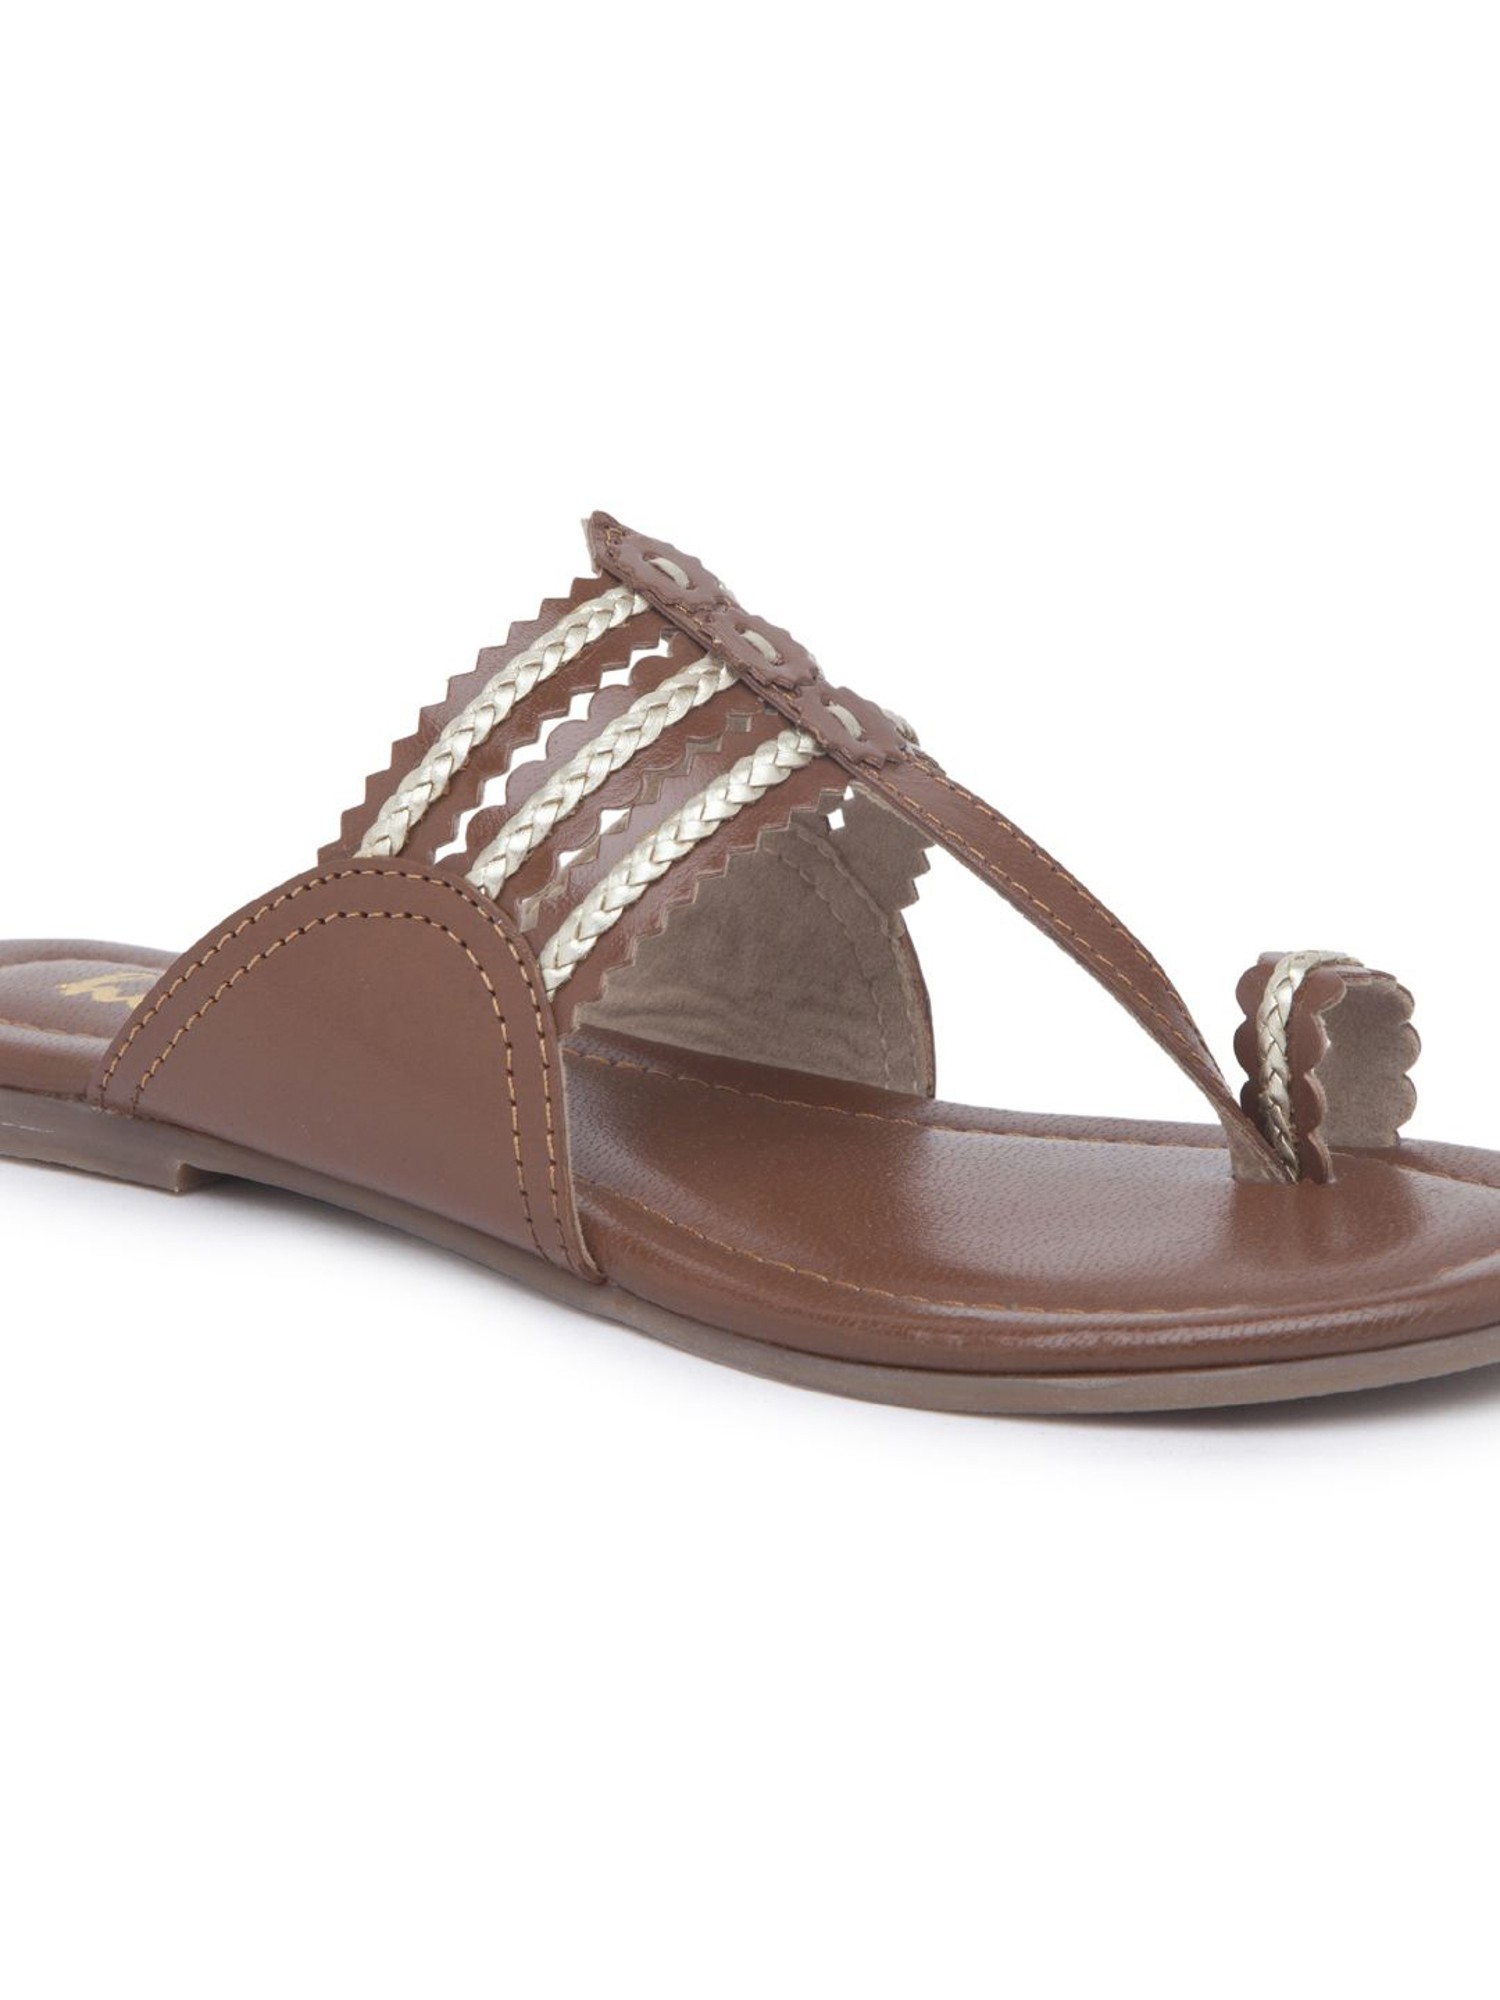 Braided Leather Sandals Toe Ring Sandals